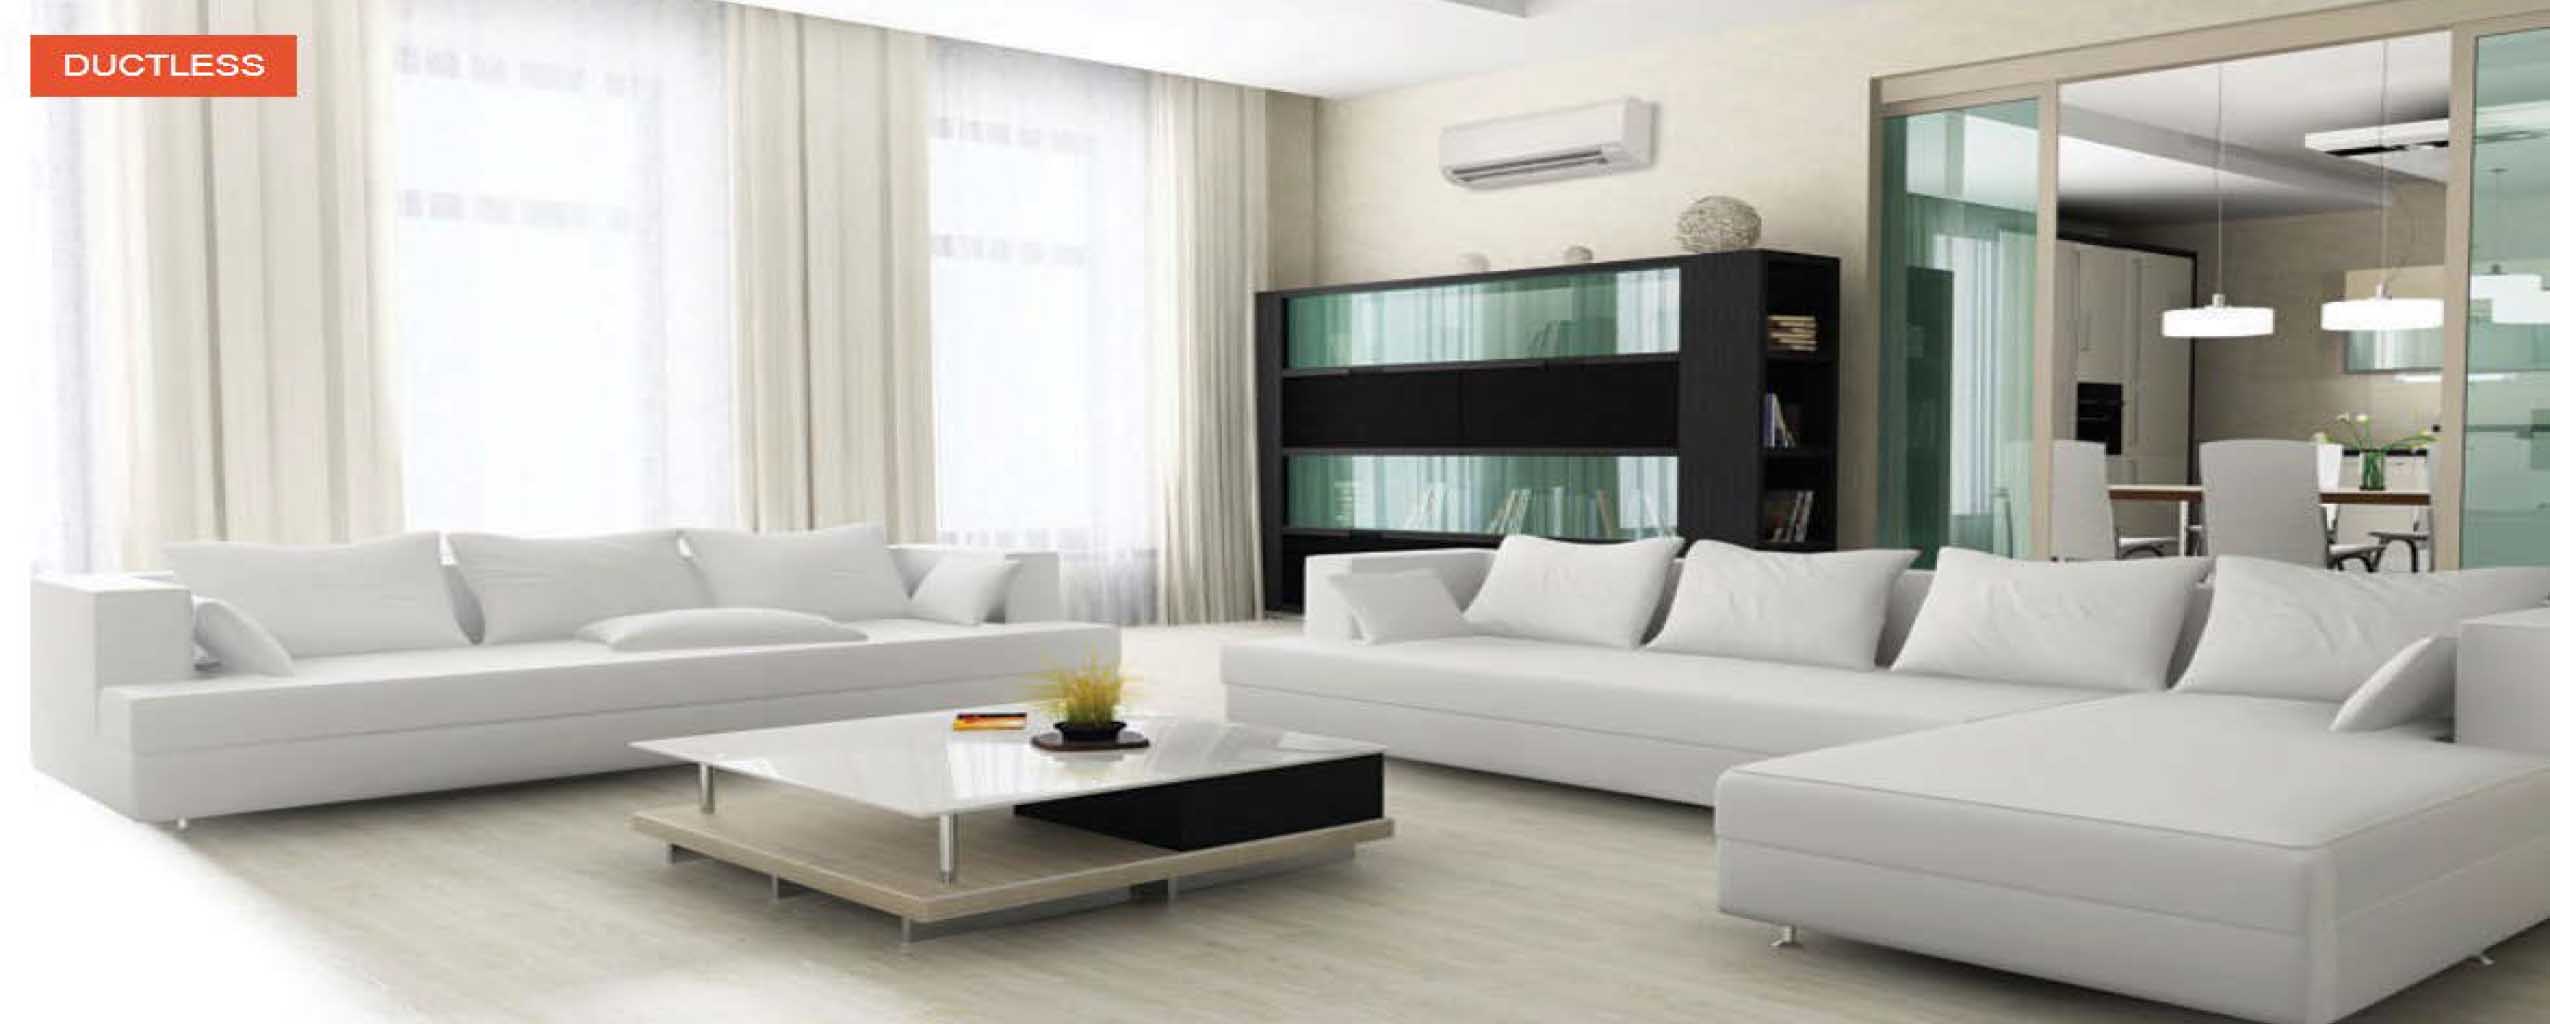 picture of a living room with a ductless mini split system